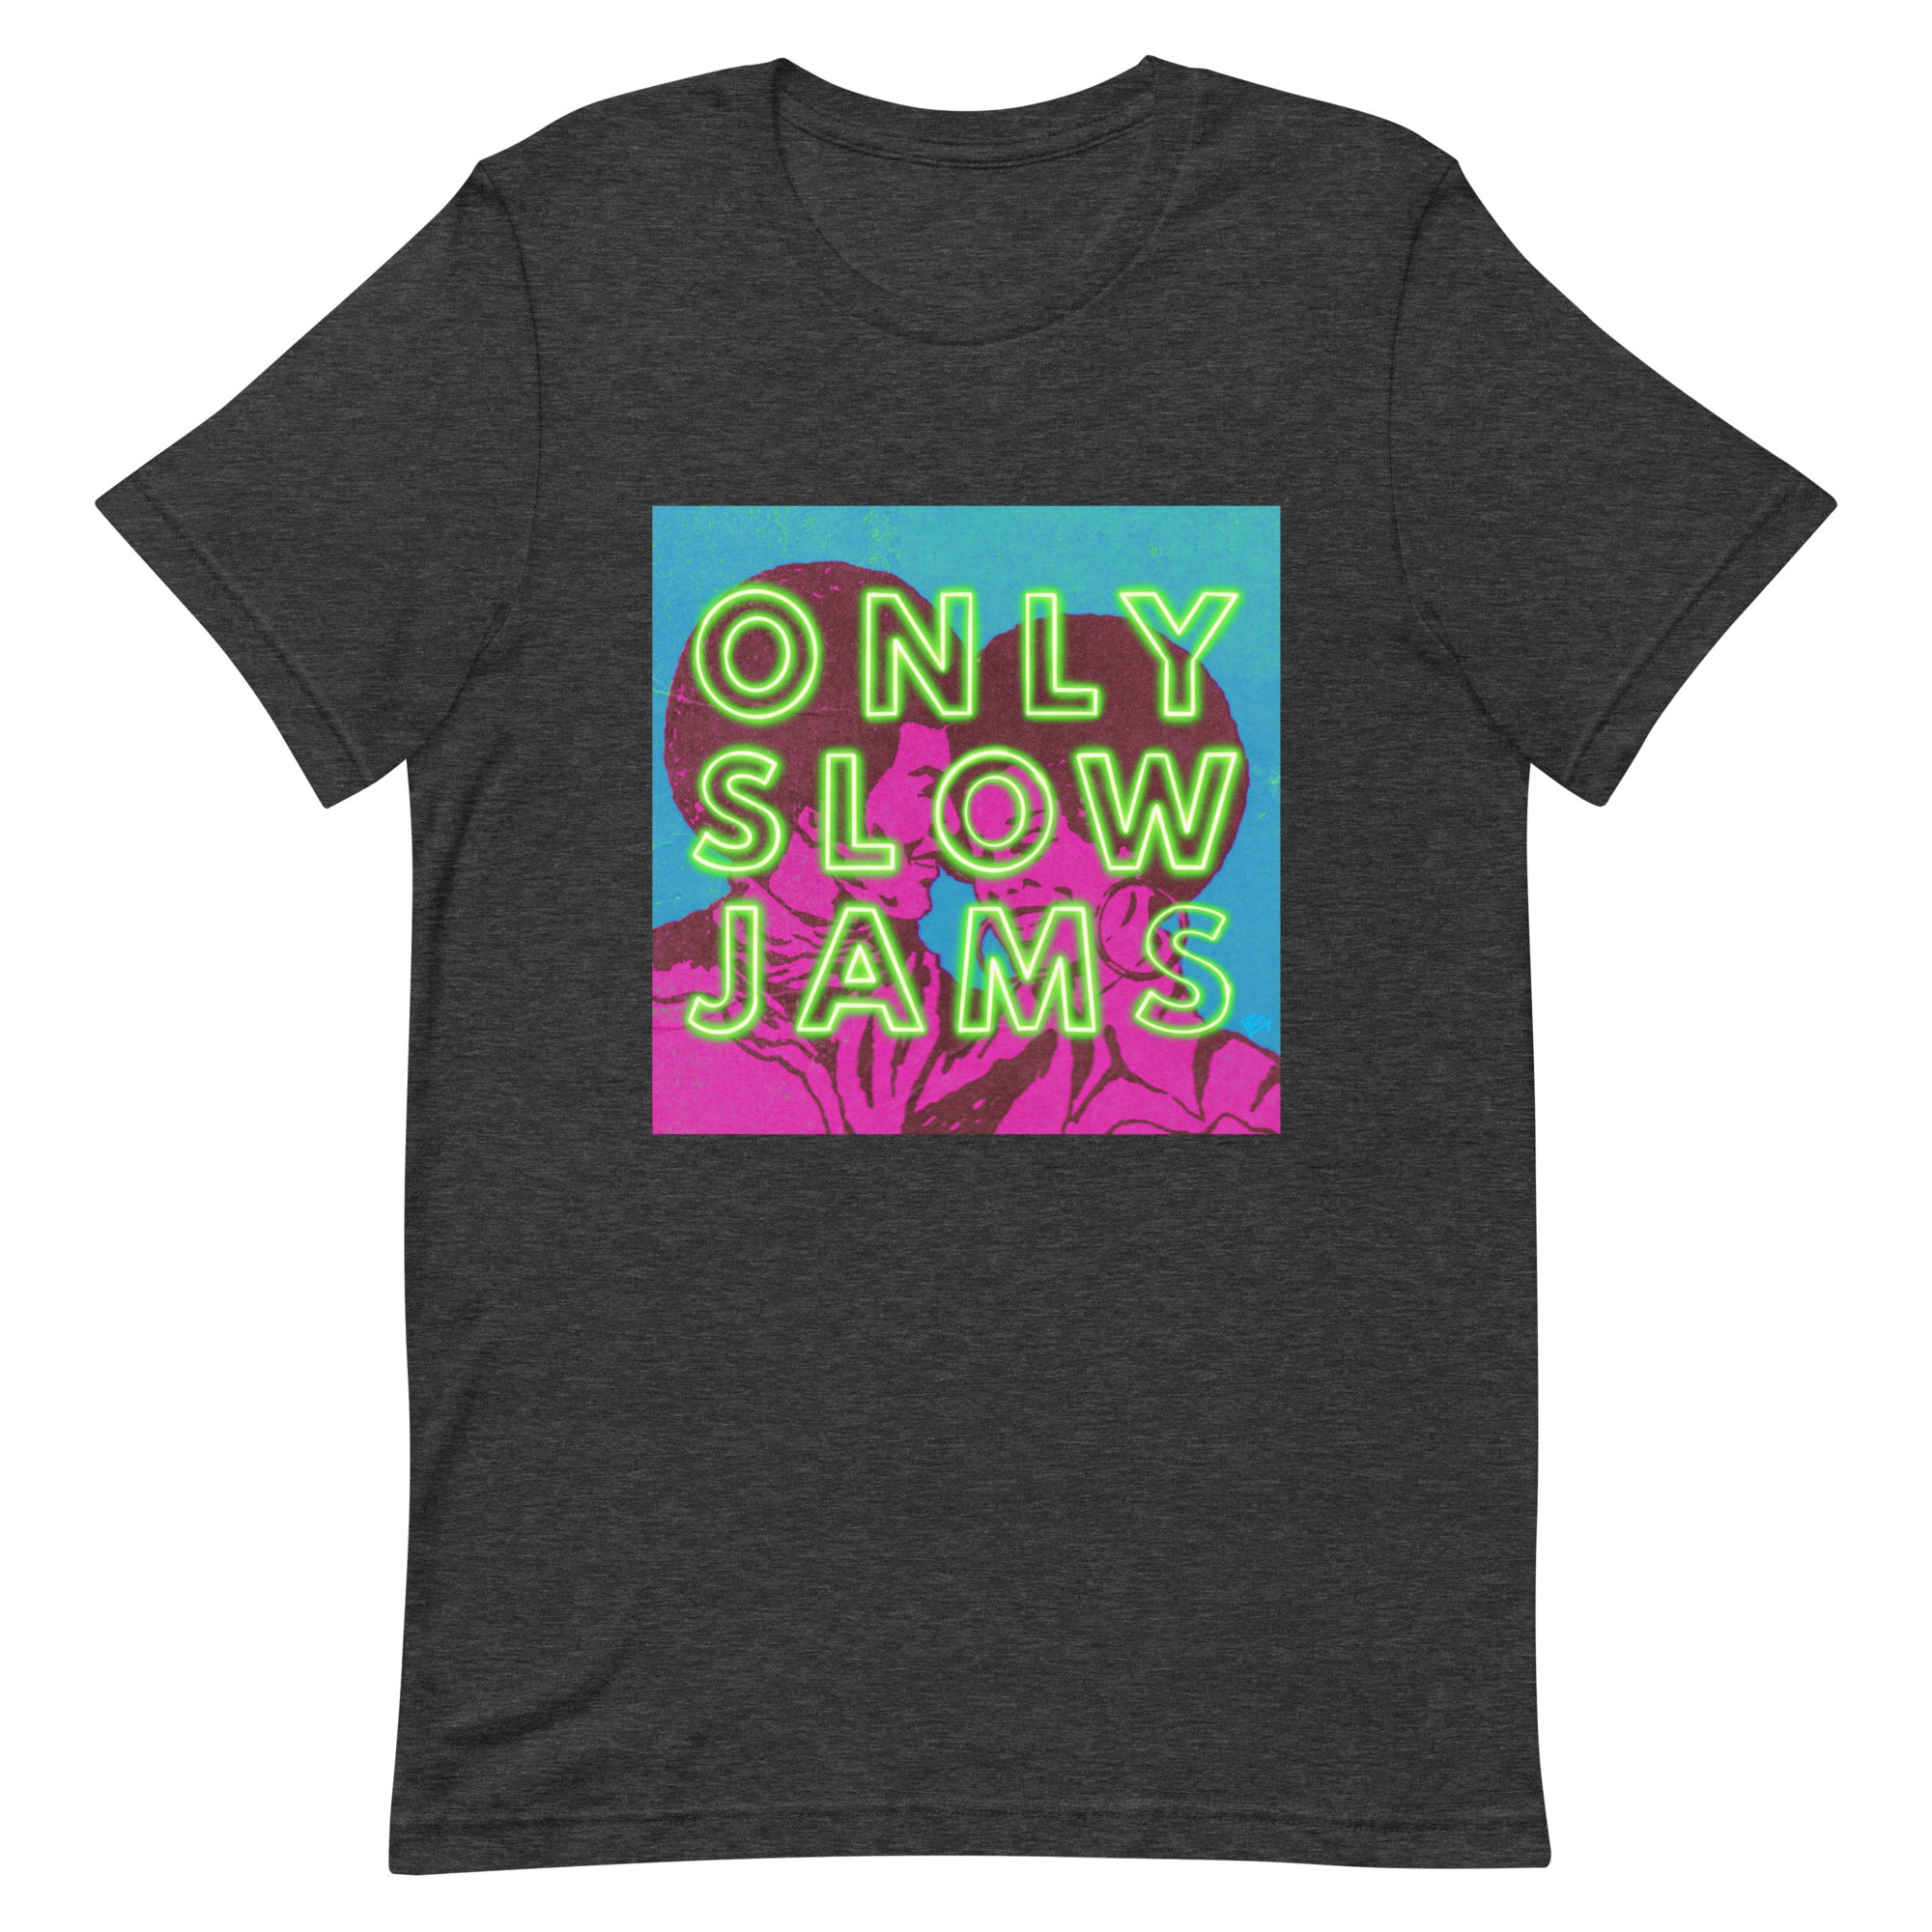 ONLY SLOW JAMS Unisex t-shirt